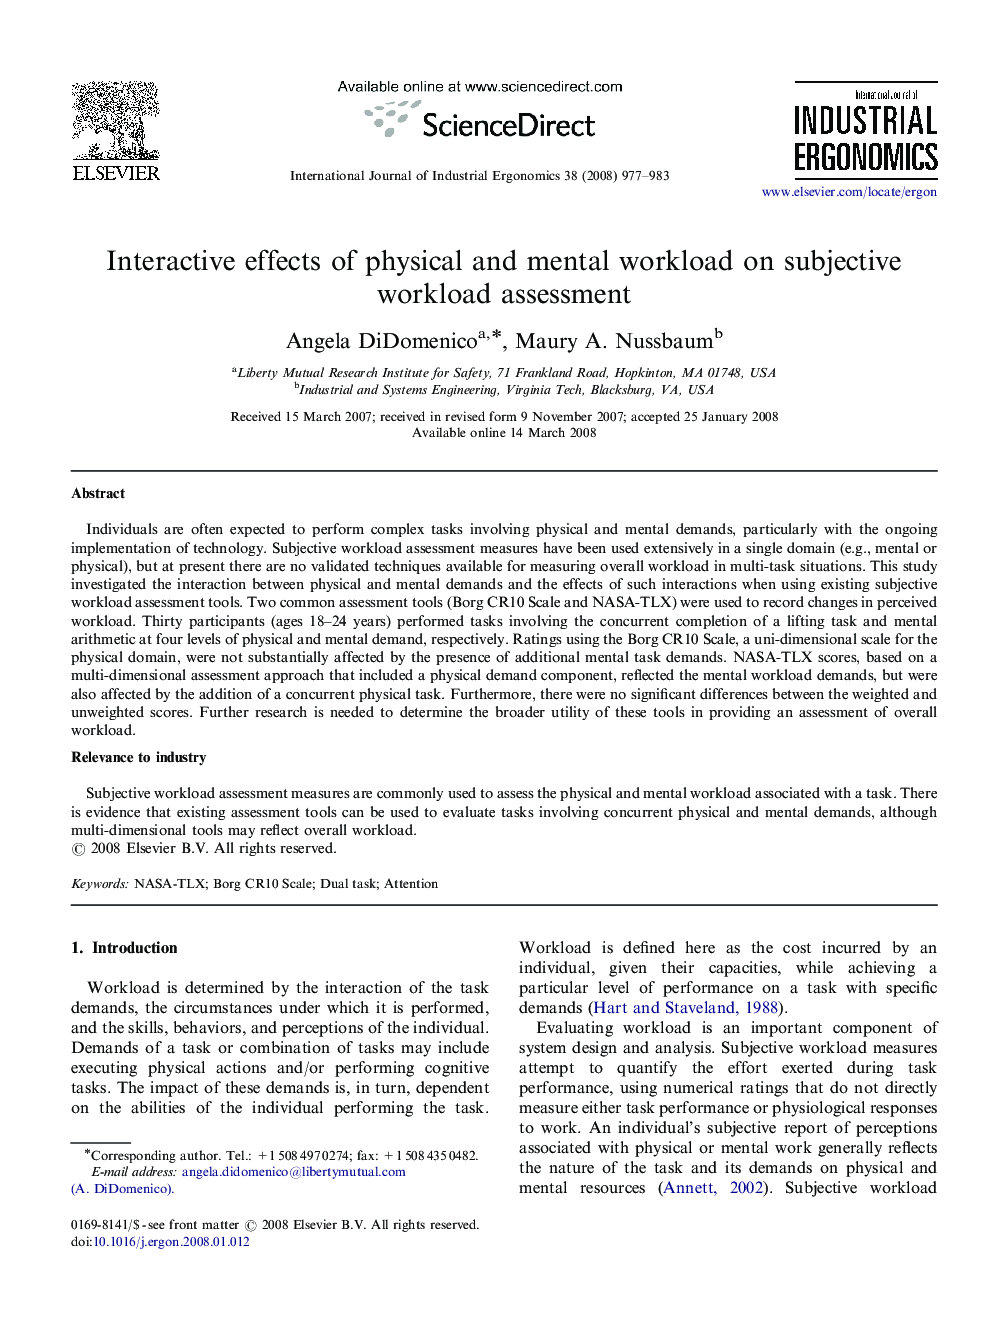 Interactive effects of physical and mental workload on subjective workload assessment